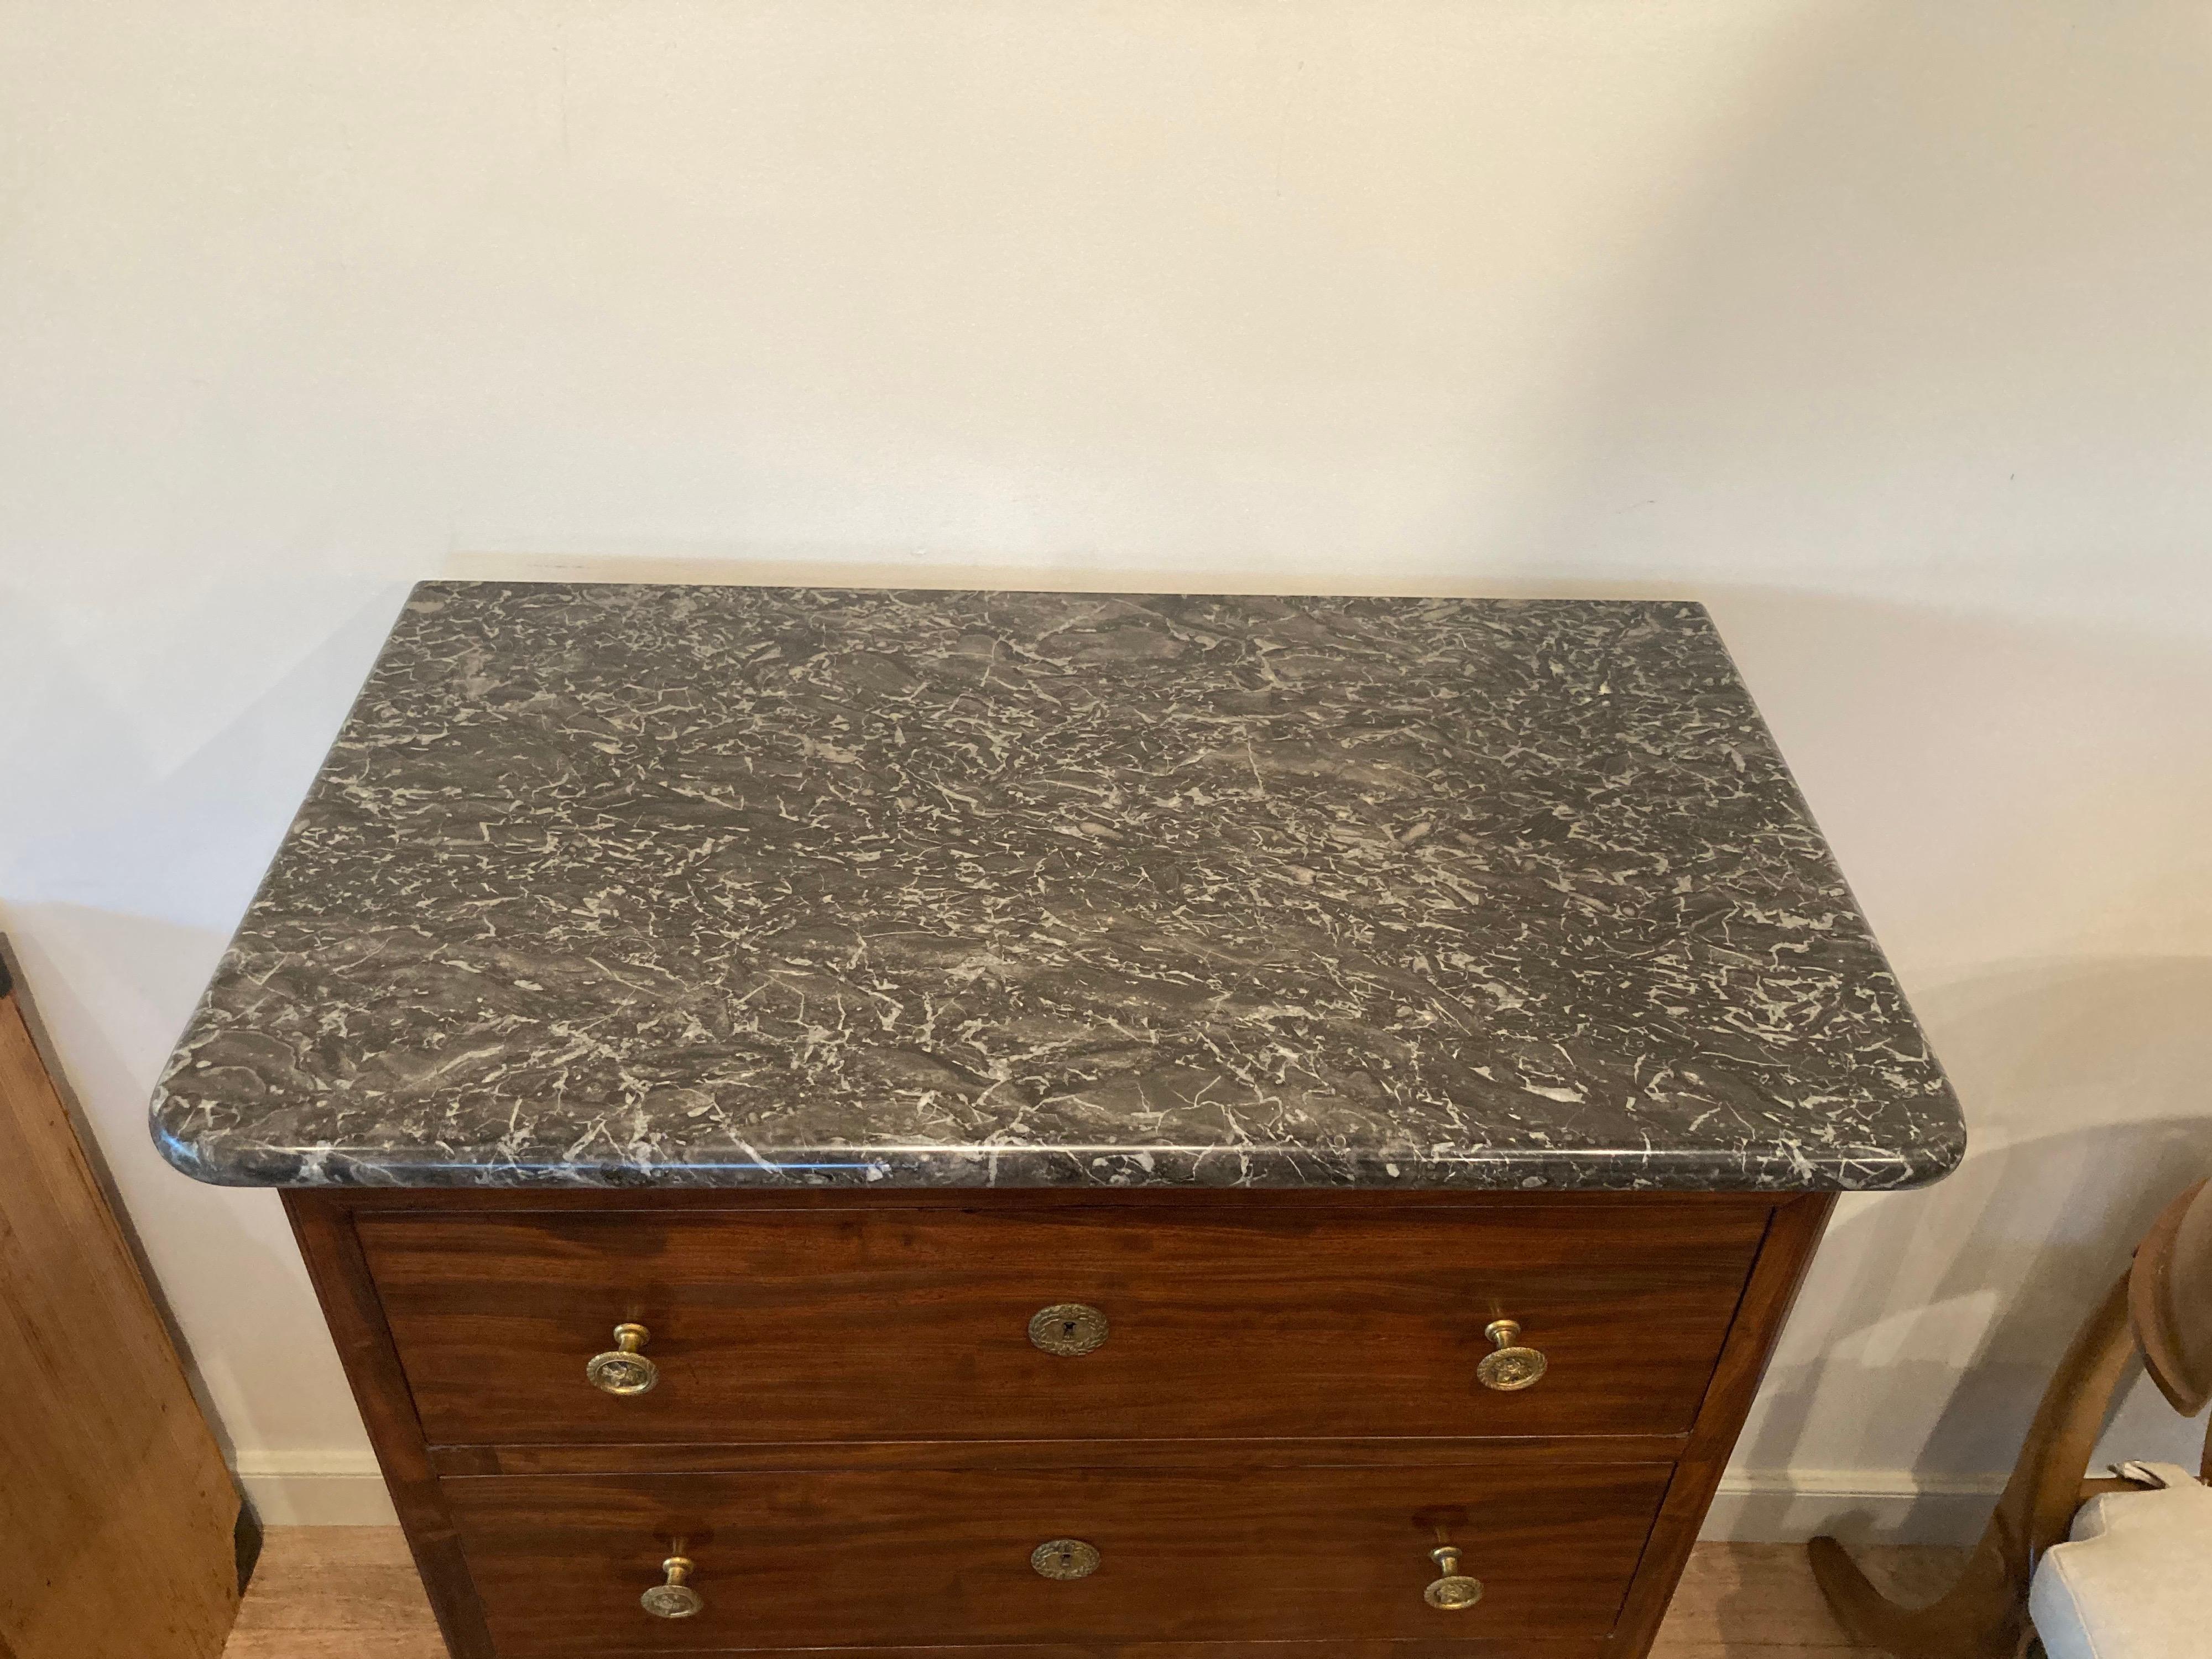 19th century French marble top chest, stamp signed ''Jacob'' below marble, with rounded front corners and four drawers having brass pulls with face relief, set on carved paw feet.